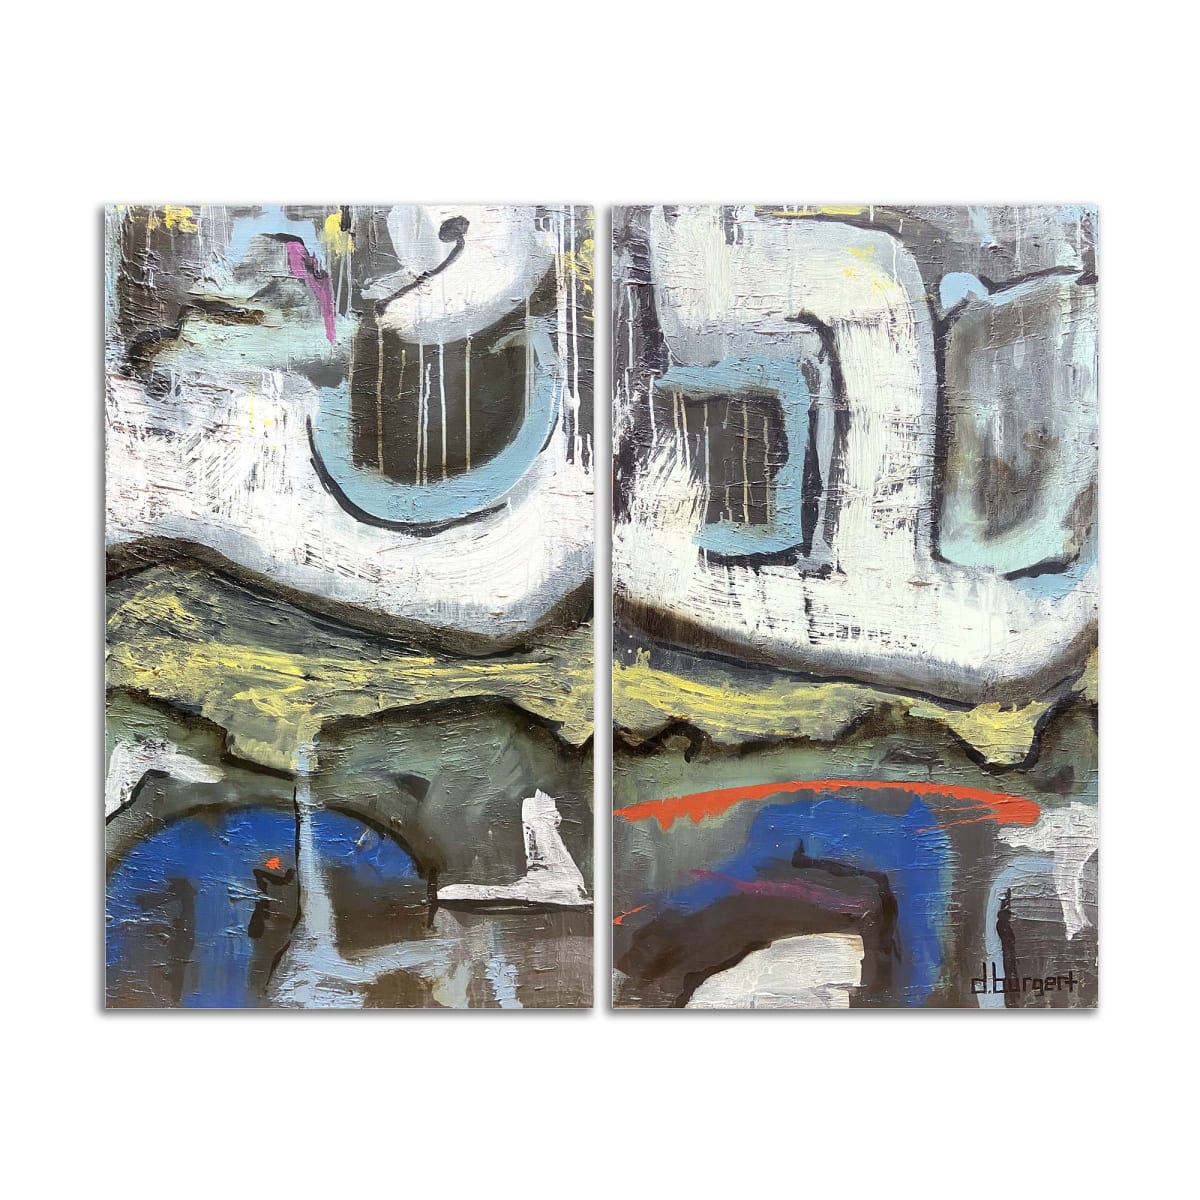 Over Tagged (diptych) by Dustin Burgert 